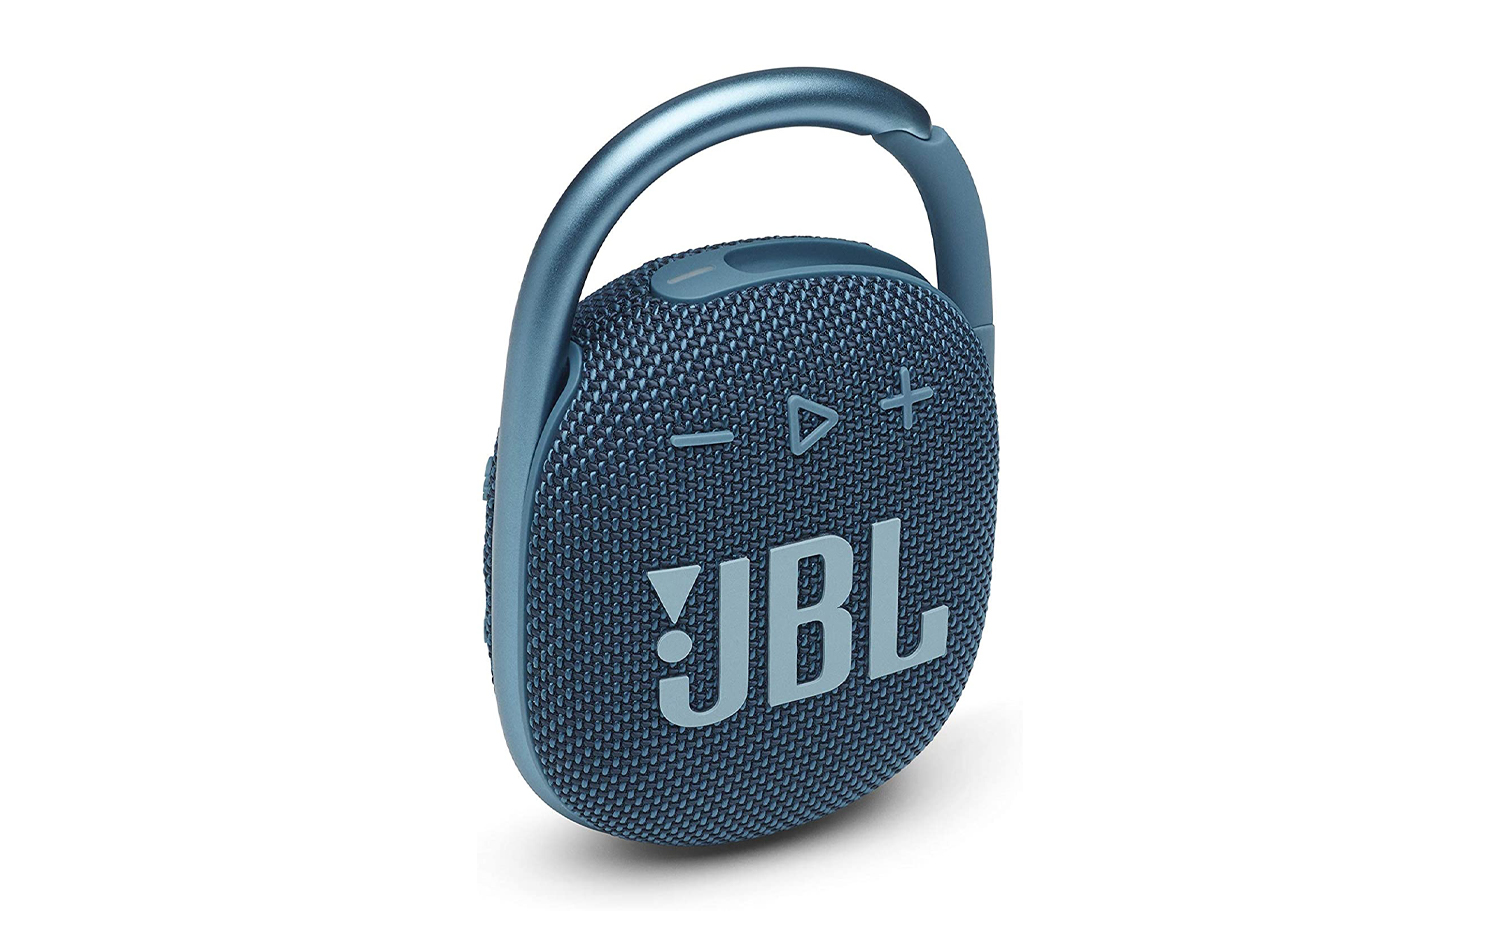 Best Back-to-School Accessories for MacBook: JBL Clip 4 on White